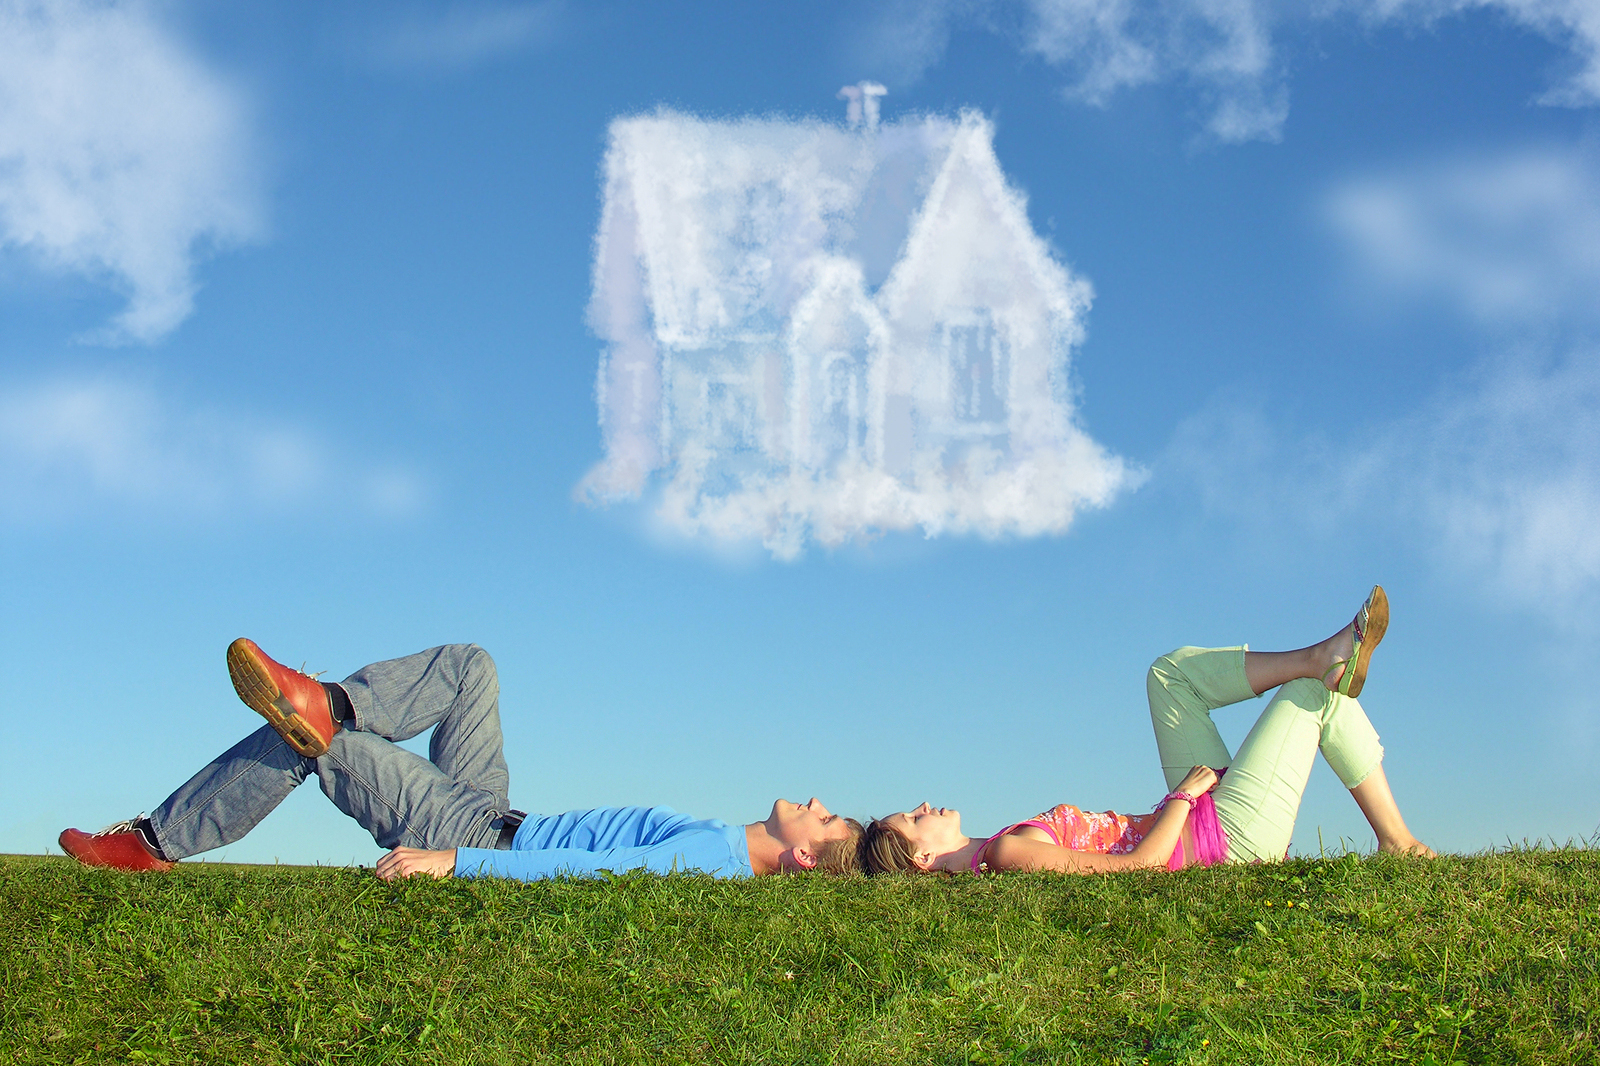 Lying Couple On Grass And Dream House Collage